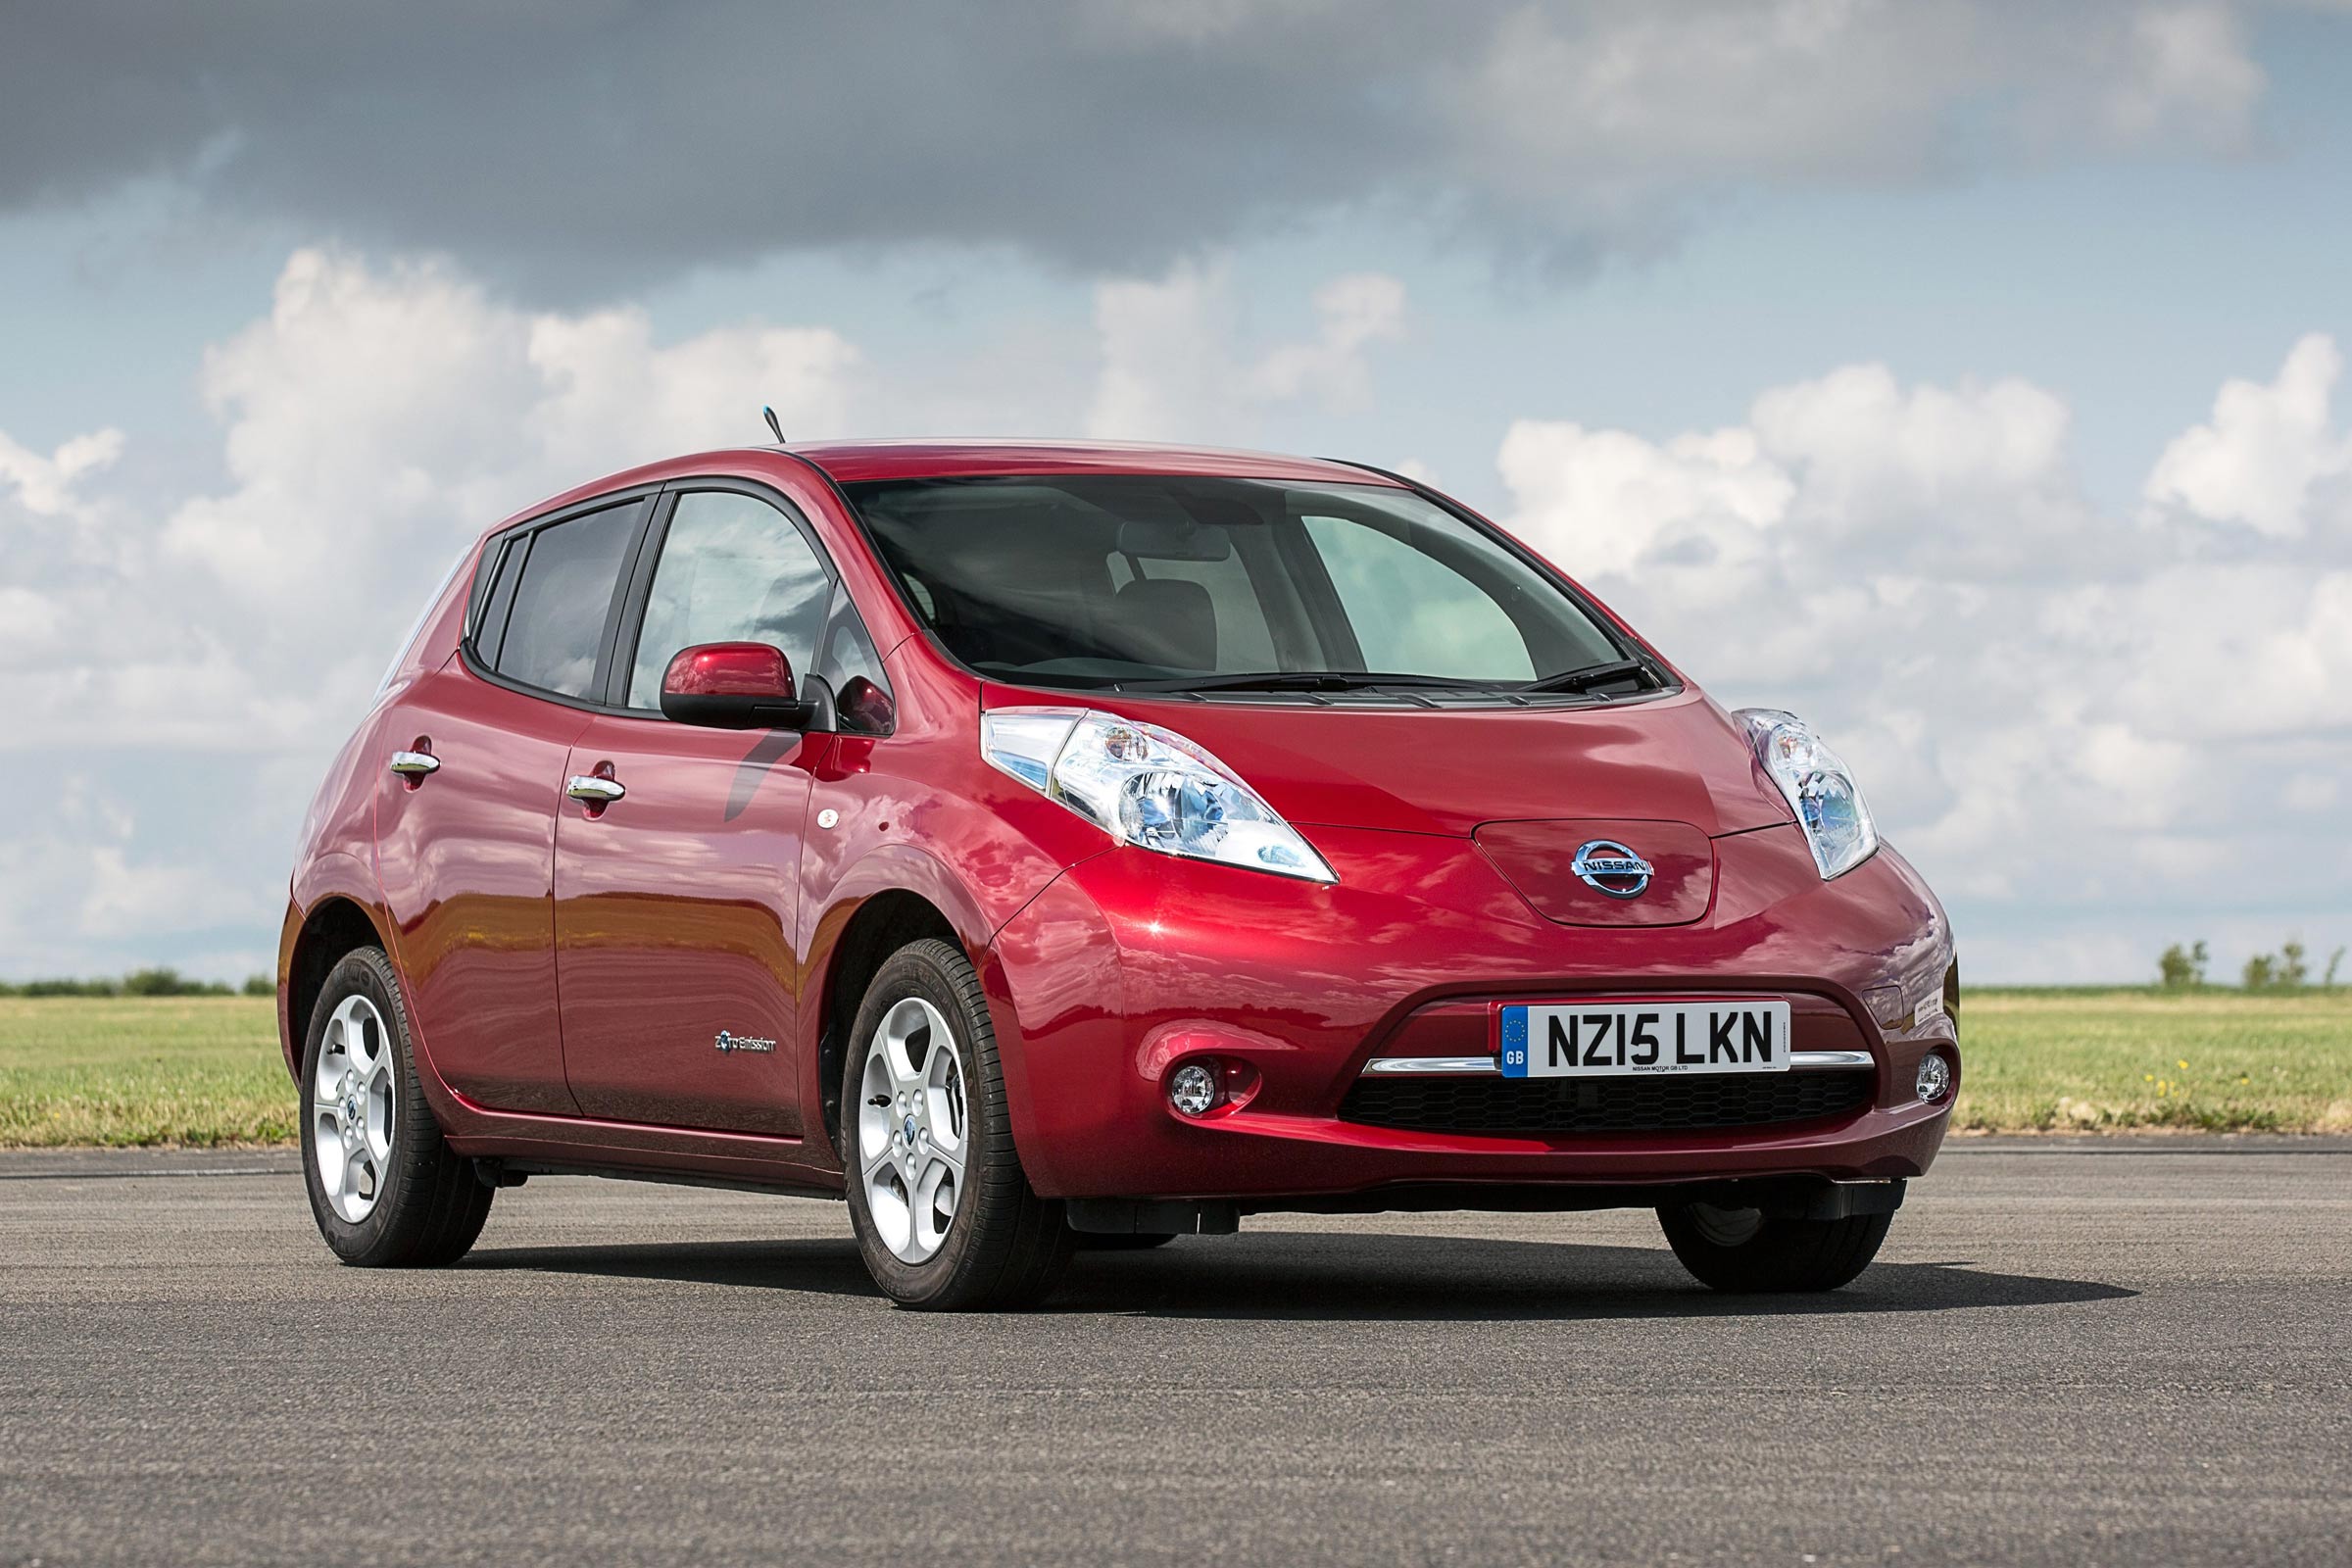 A red Nissan Leaf on an open road, with grass in the background.